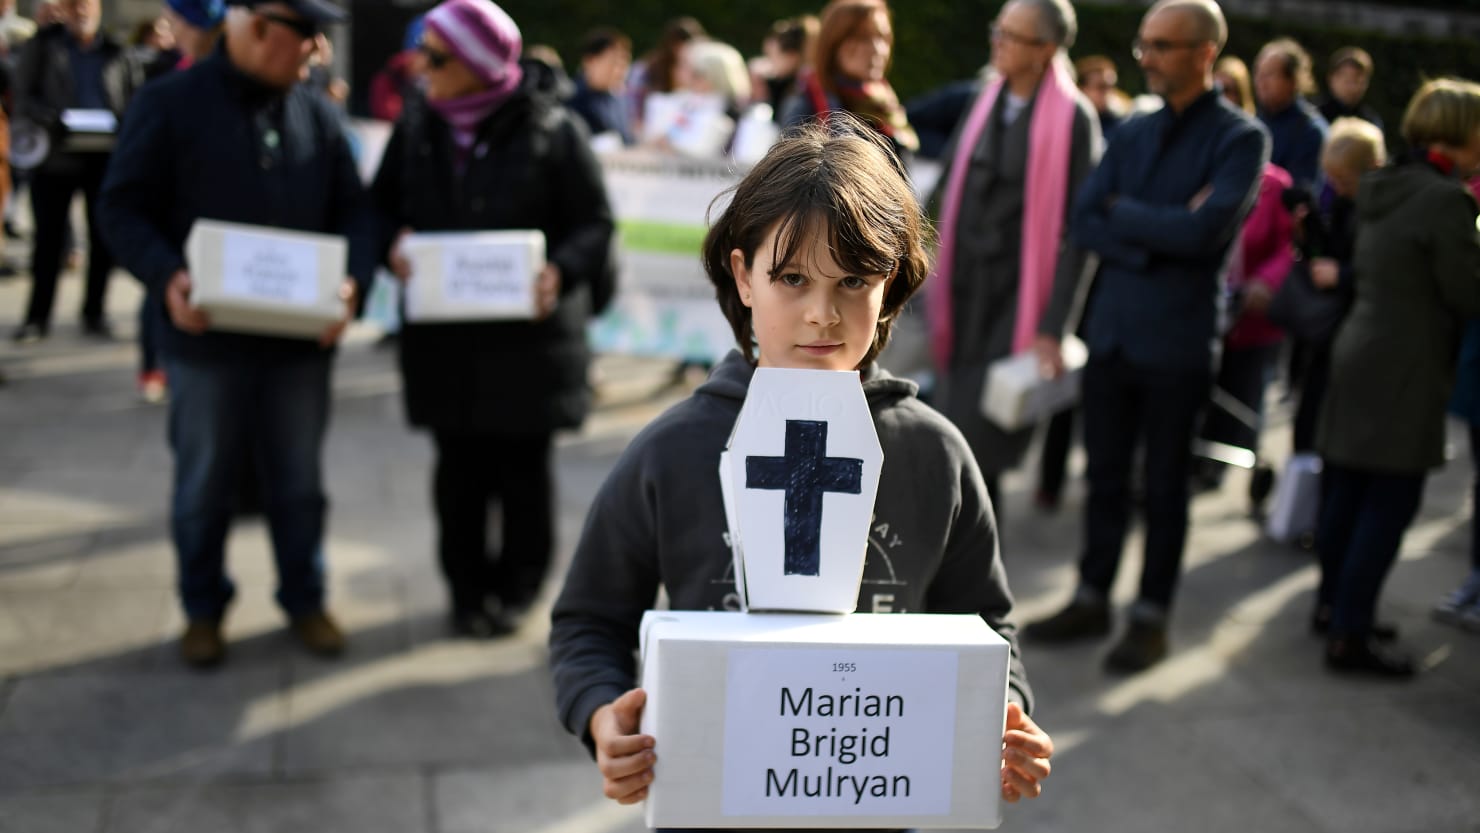 Ireland says 9,000 babies die in Catholic homes, but it was society’s fault, not the church